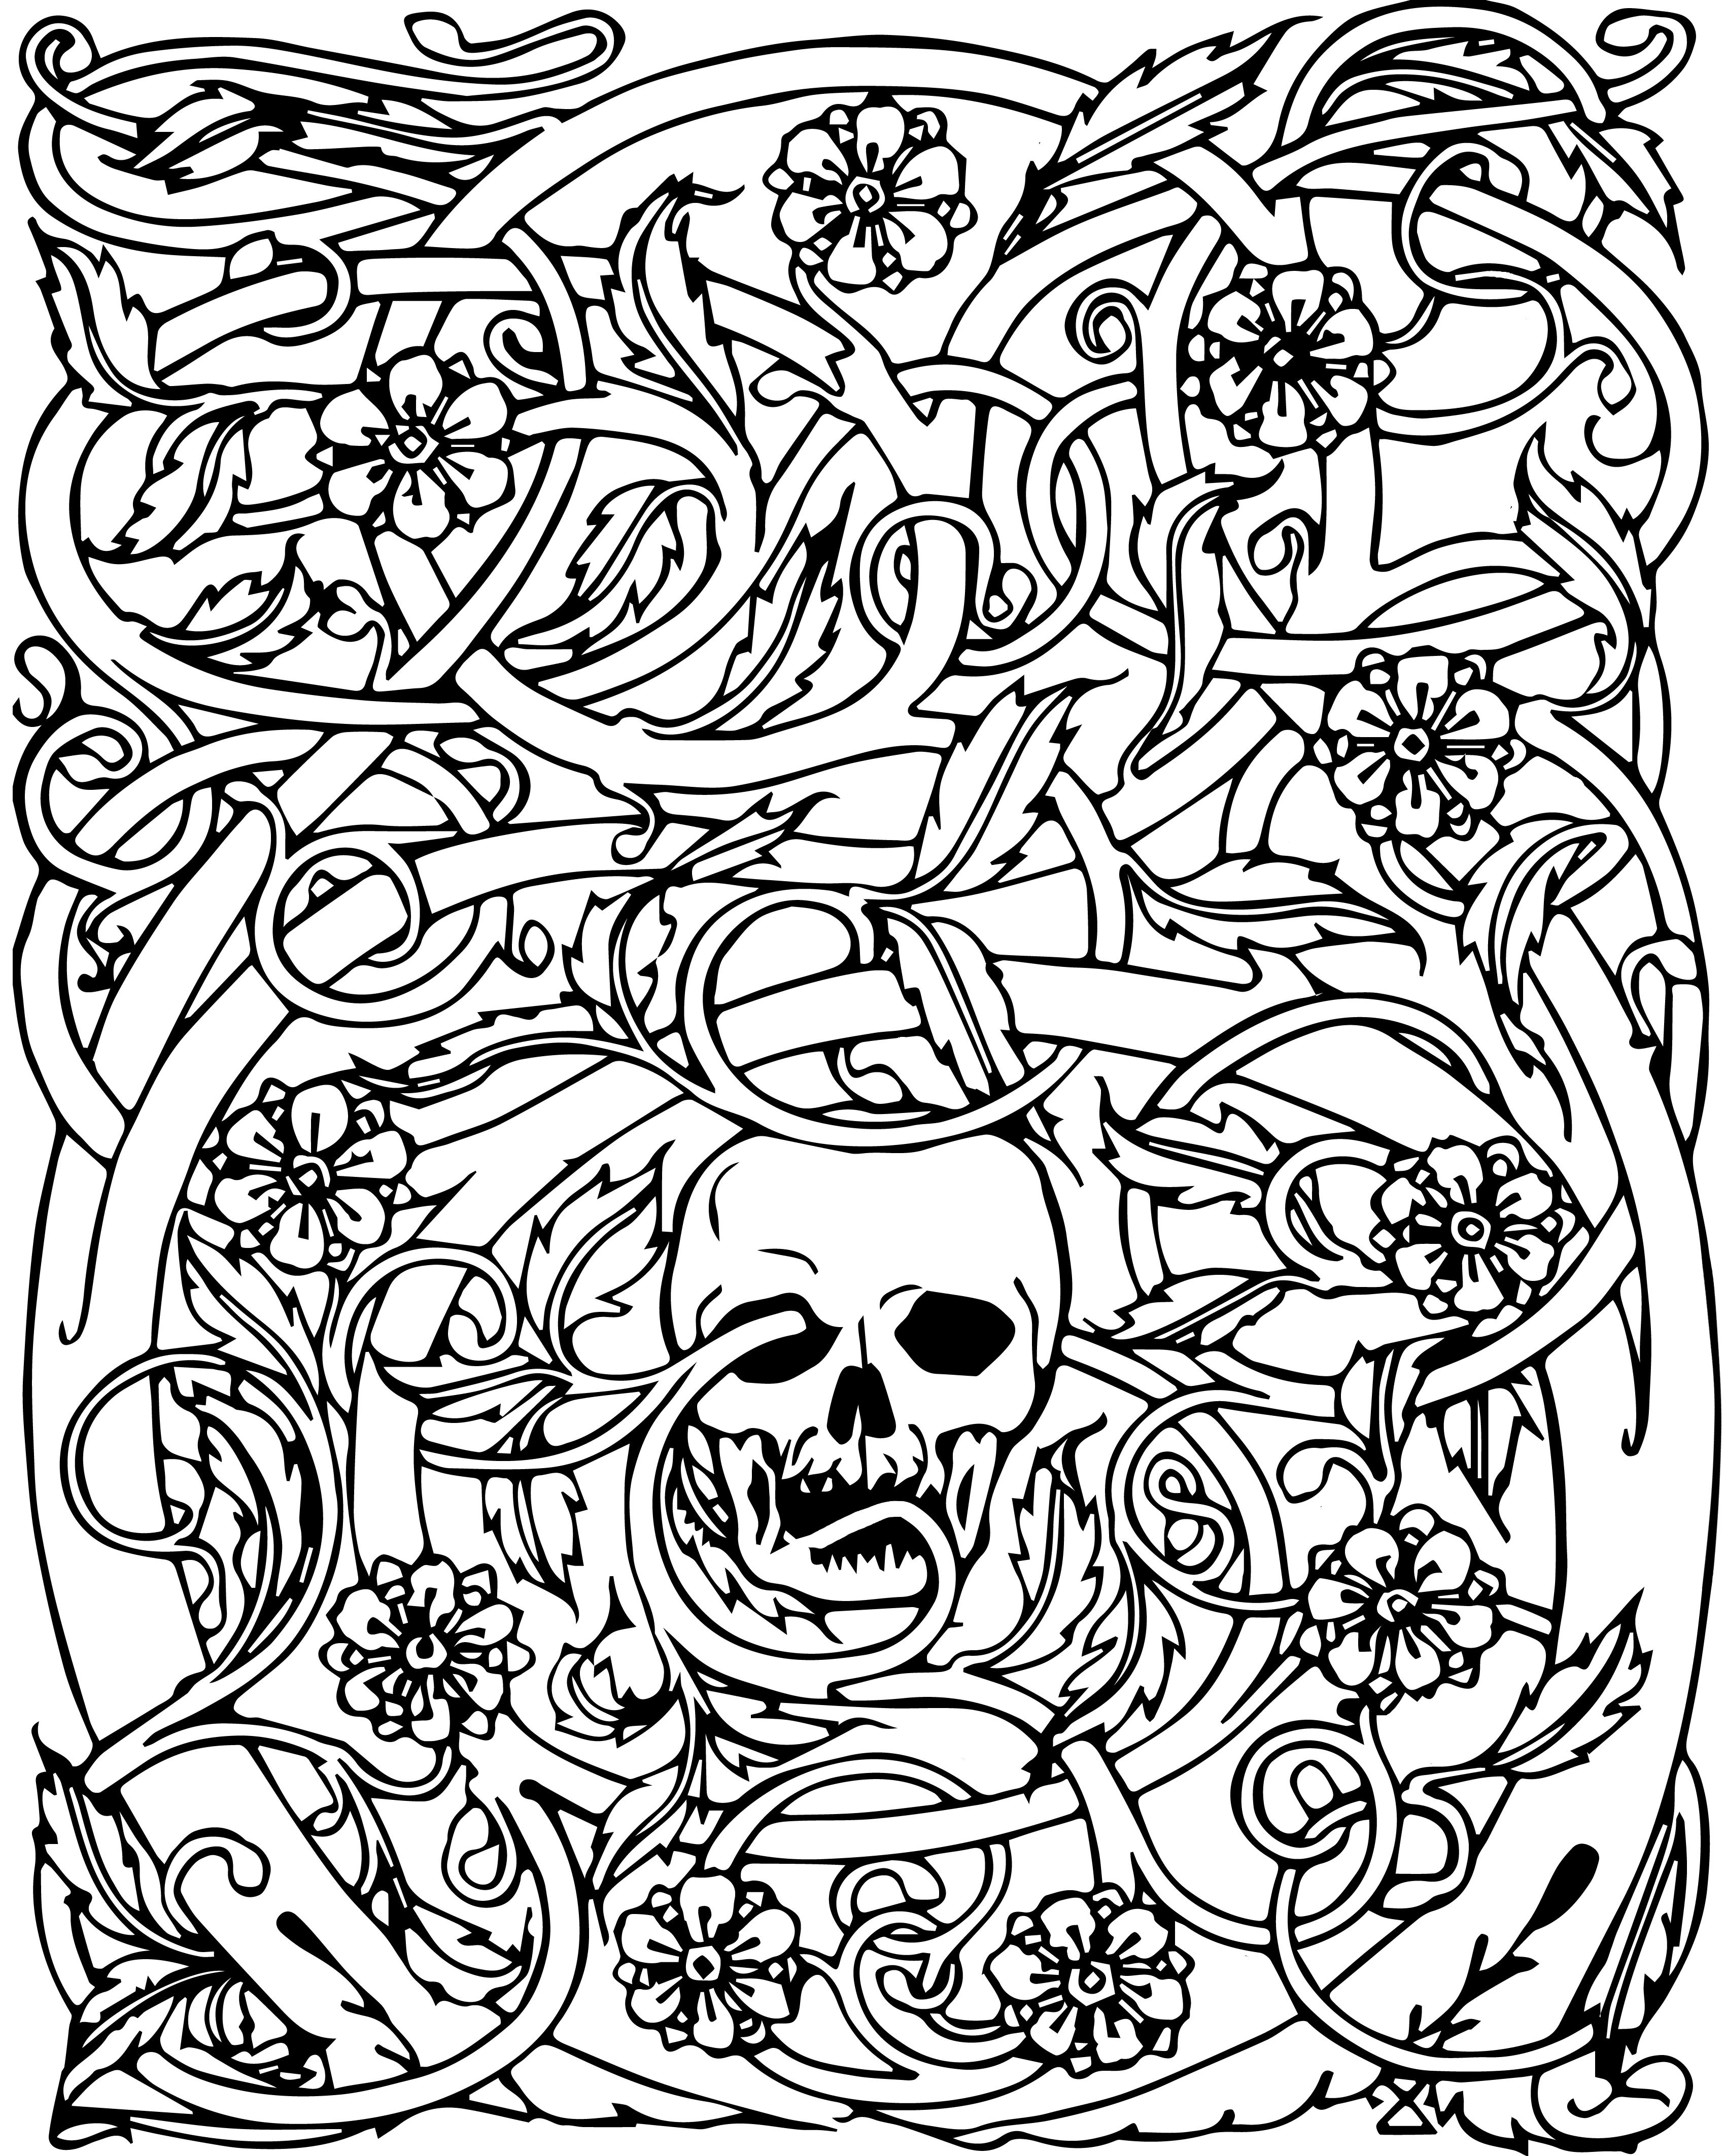 Free Coloring Pages Adults Art And Abstract Category Image 35 ...